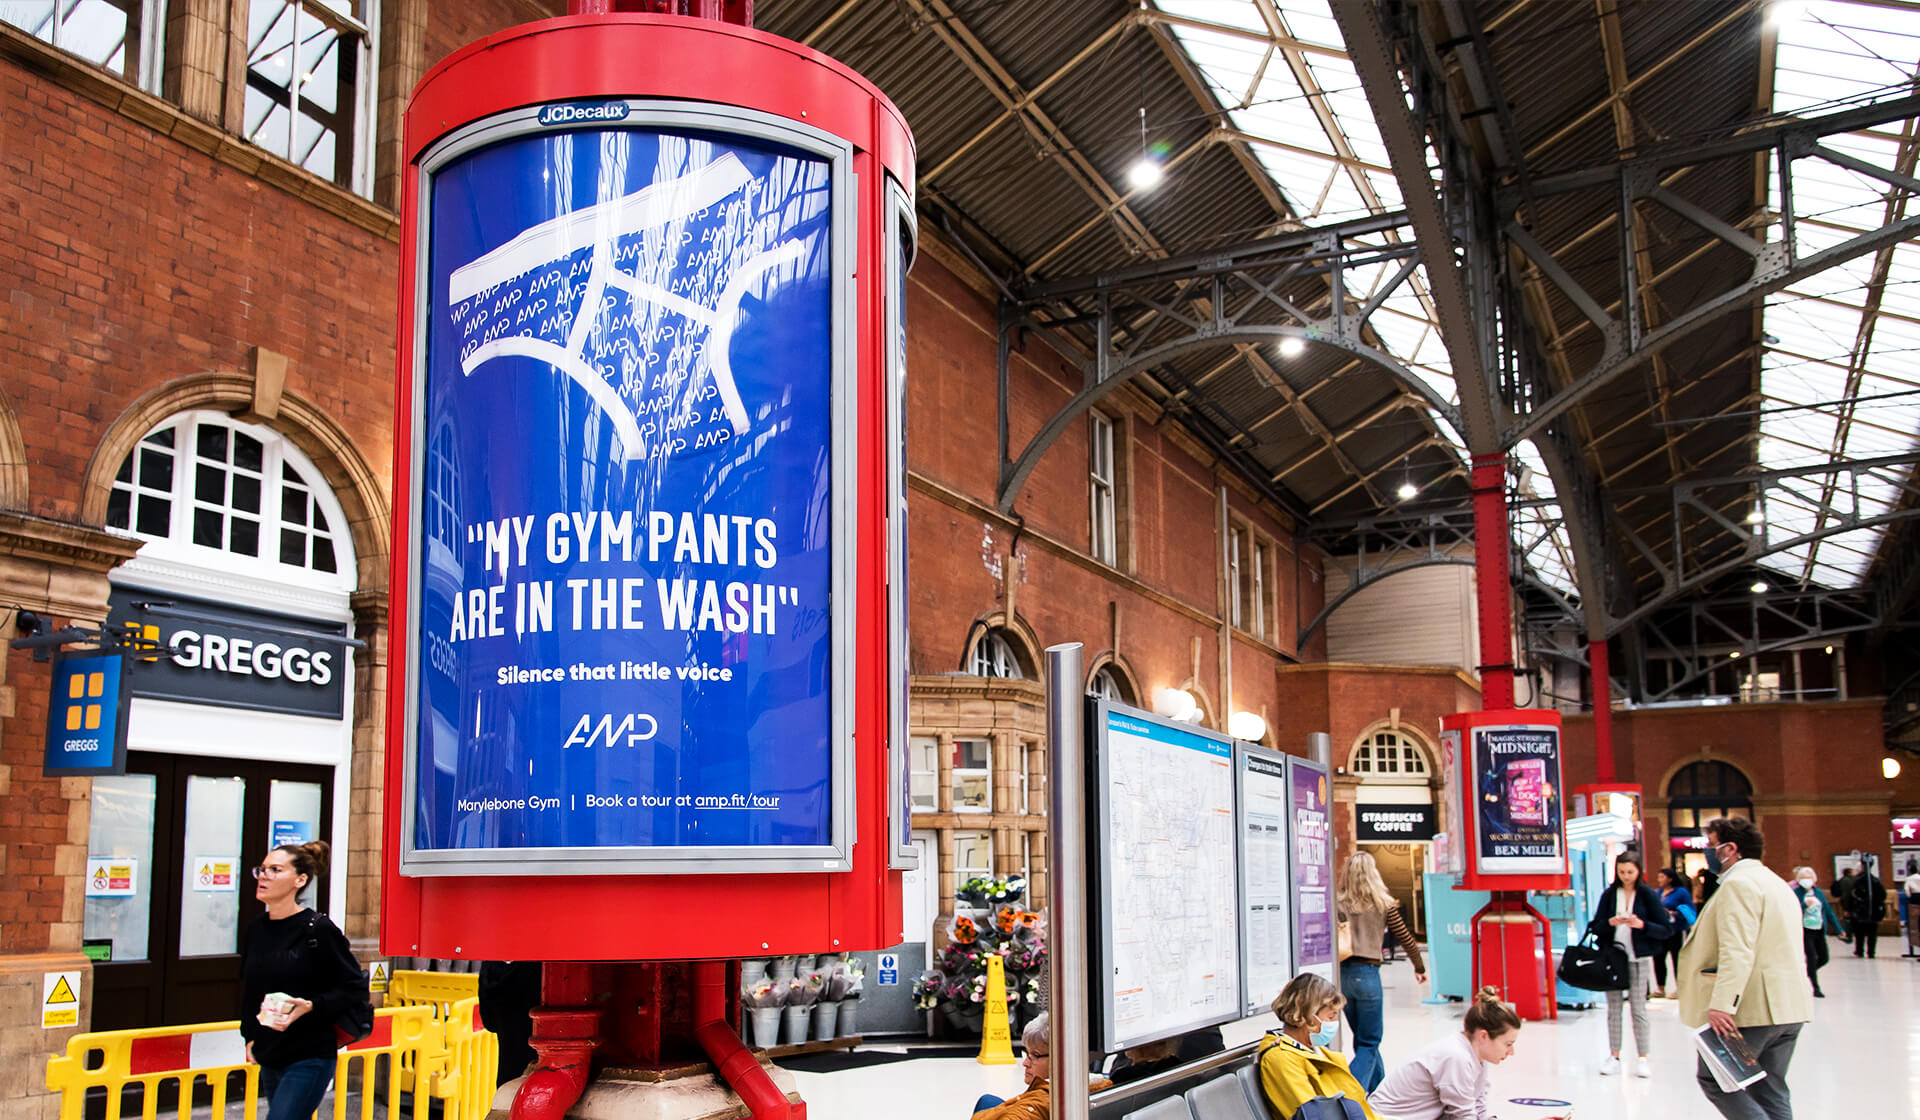 AMP Athletic - Gym pants are in the wash - London advertising campaign - Mellor&Smith - Marylebone Station